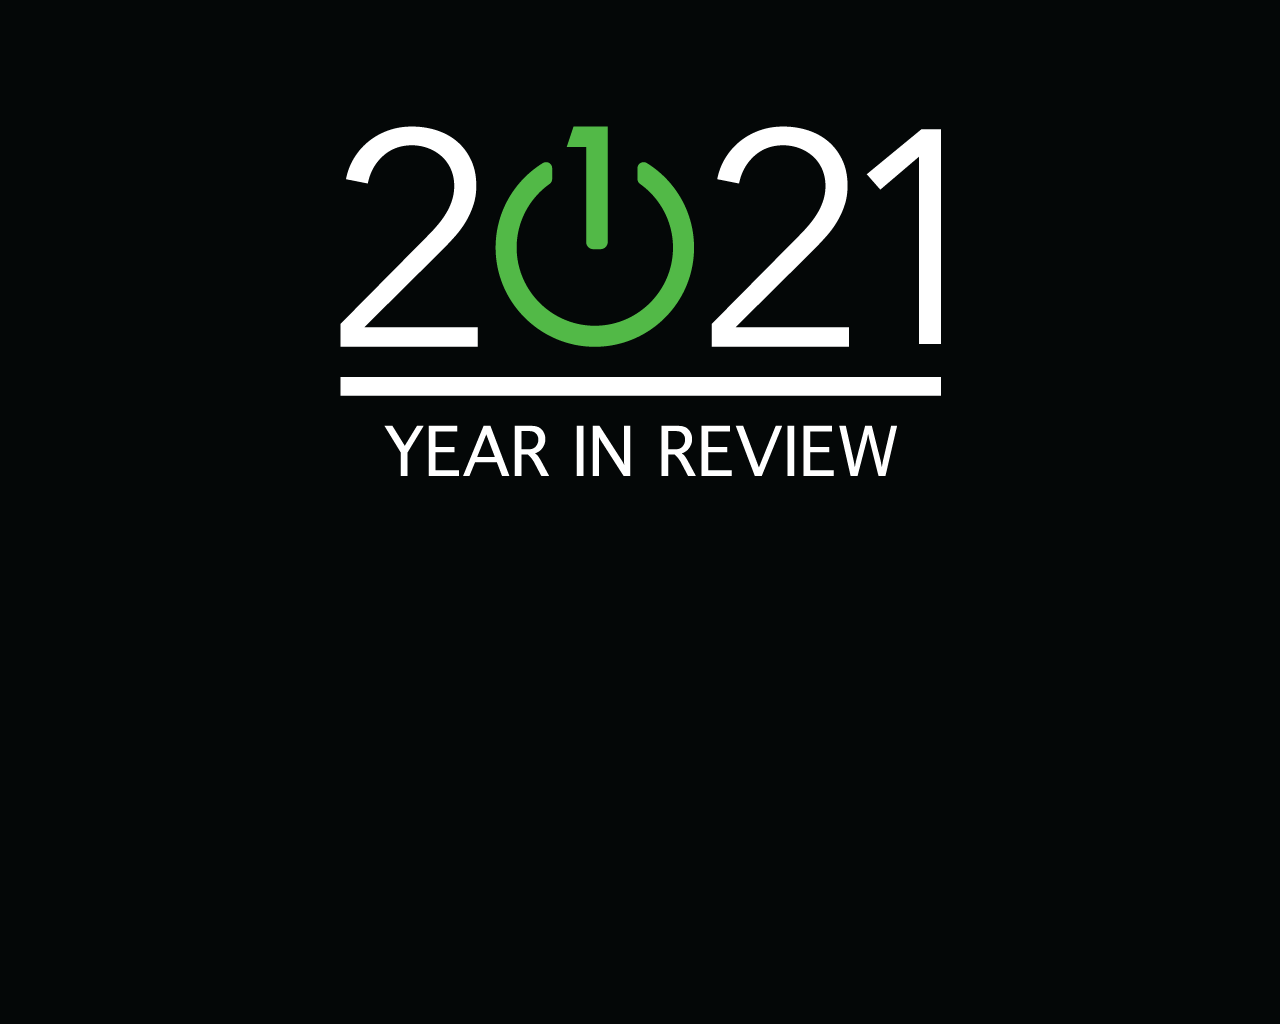 Premier One 2021 Year in Review